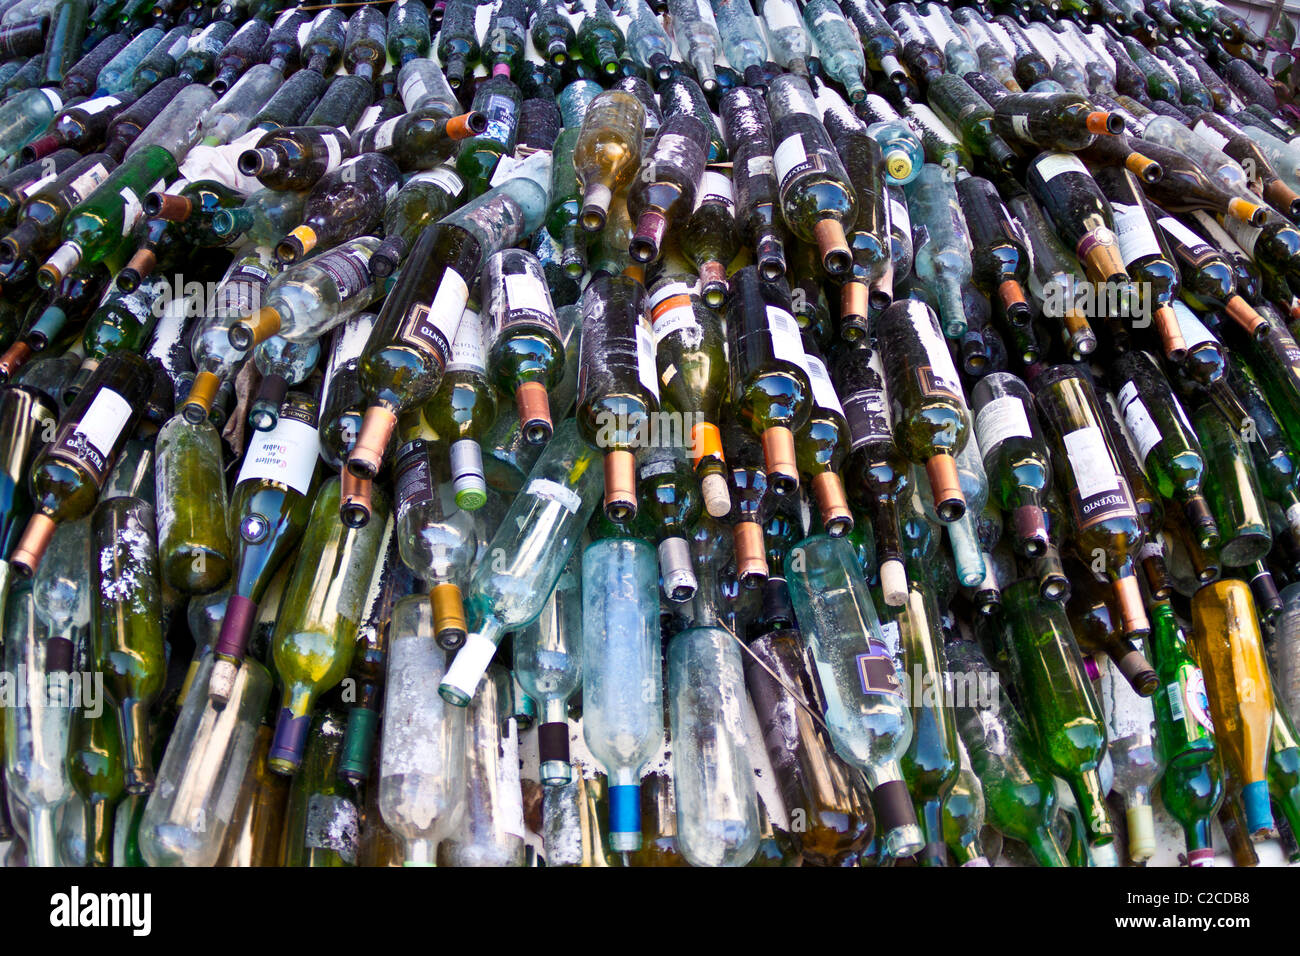 A huge pile of glass bottles waiting recycling. Stock Photo